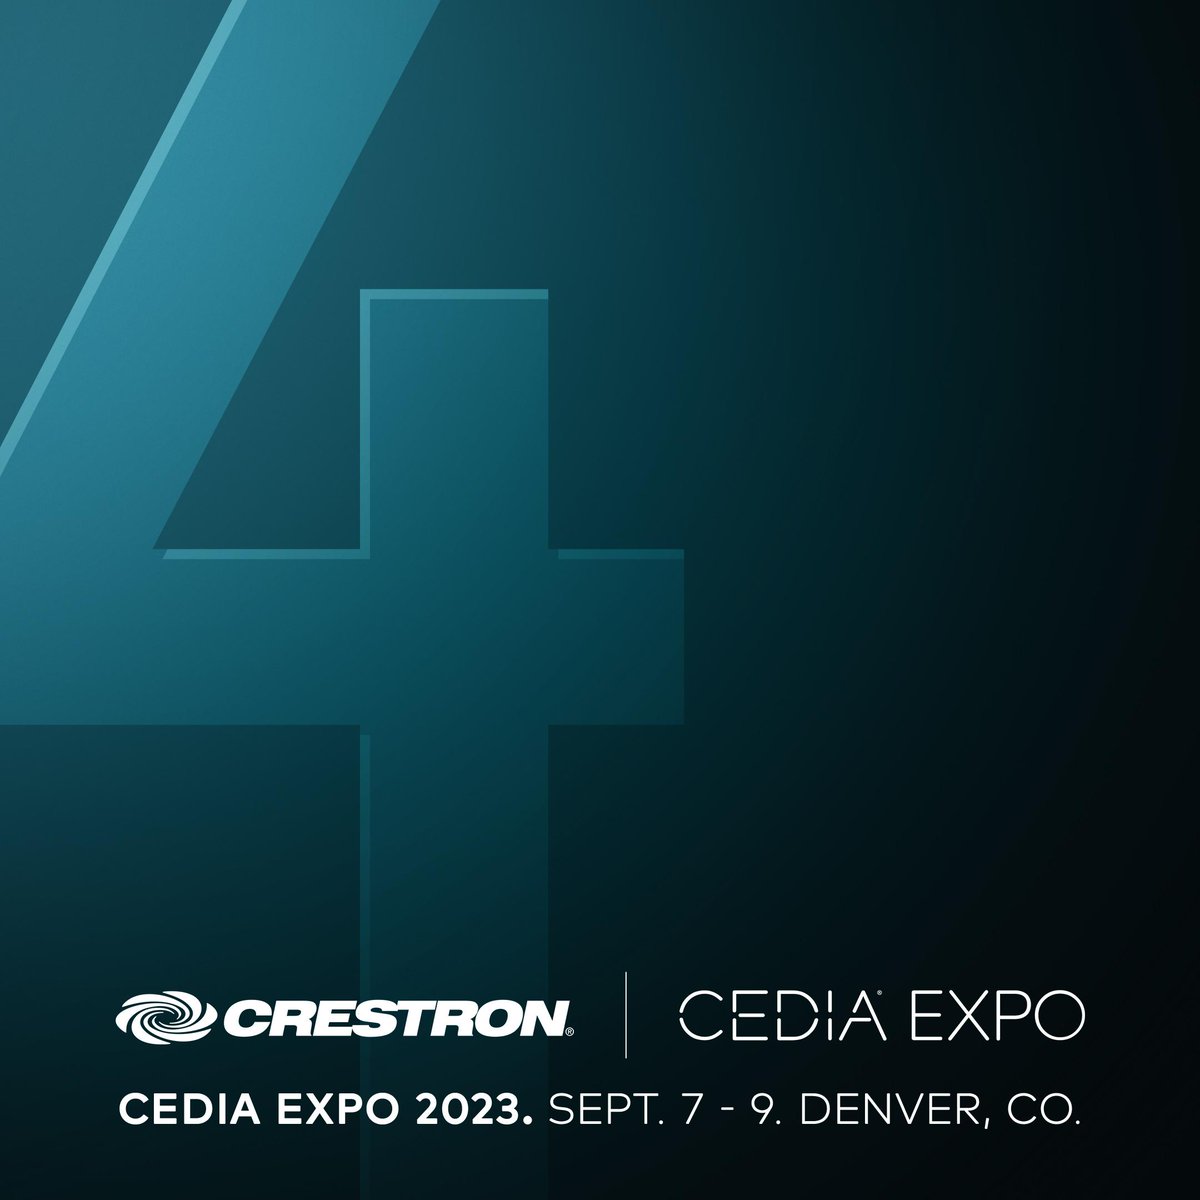 Everyone’s idea of the perfect smart home is different. Stop by CEDIA to discuss your perfect smart home and get a personal demo of Crestron Solutions. #CrestronCEDIA2023 #CEDIA2023  

Register now using code CRE25 for a FREE exhibit hall pass.  

ow.ly/9ZNA50P6Gwa